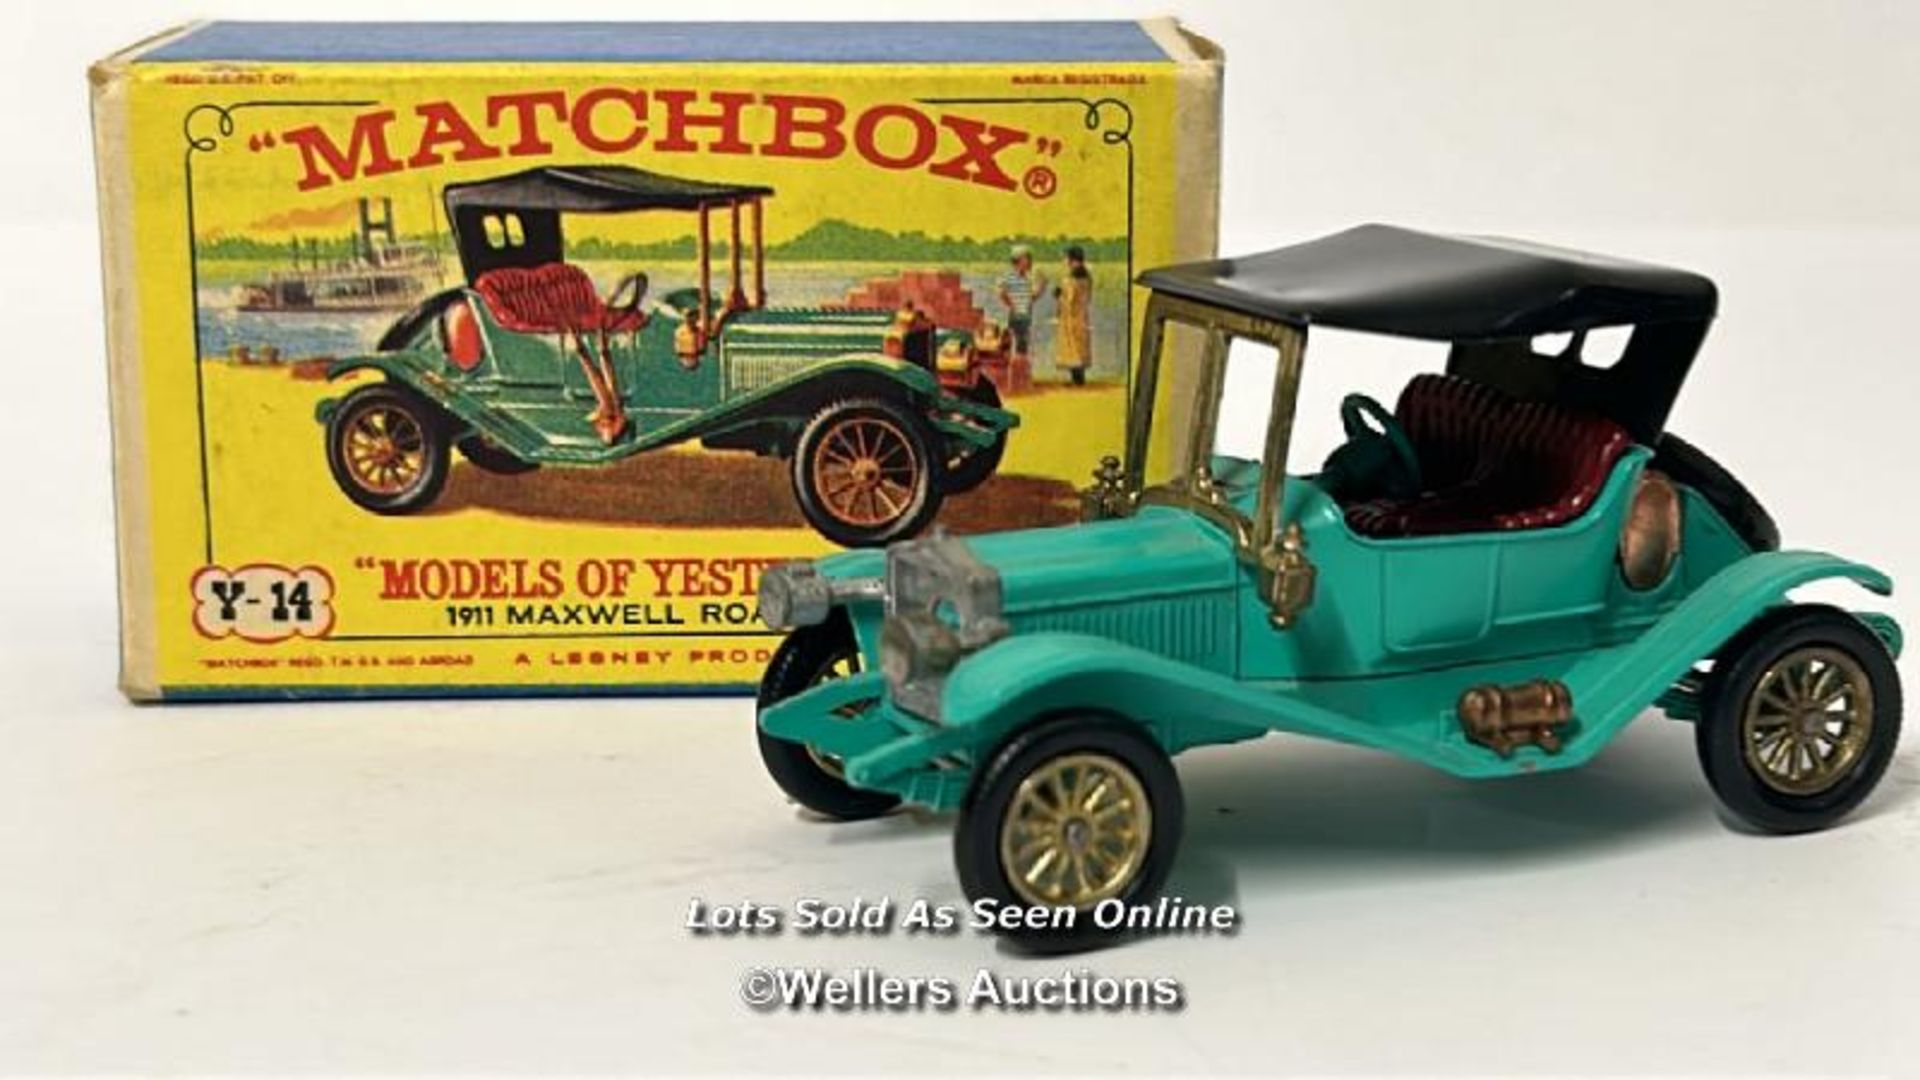 Vintage Matchbox Models of Yesteryear including Moko Lesney accessory pack no.1 Esso gas pumps and - Image 16 of 21